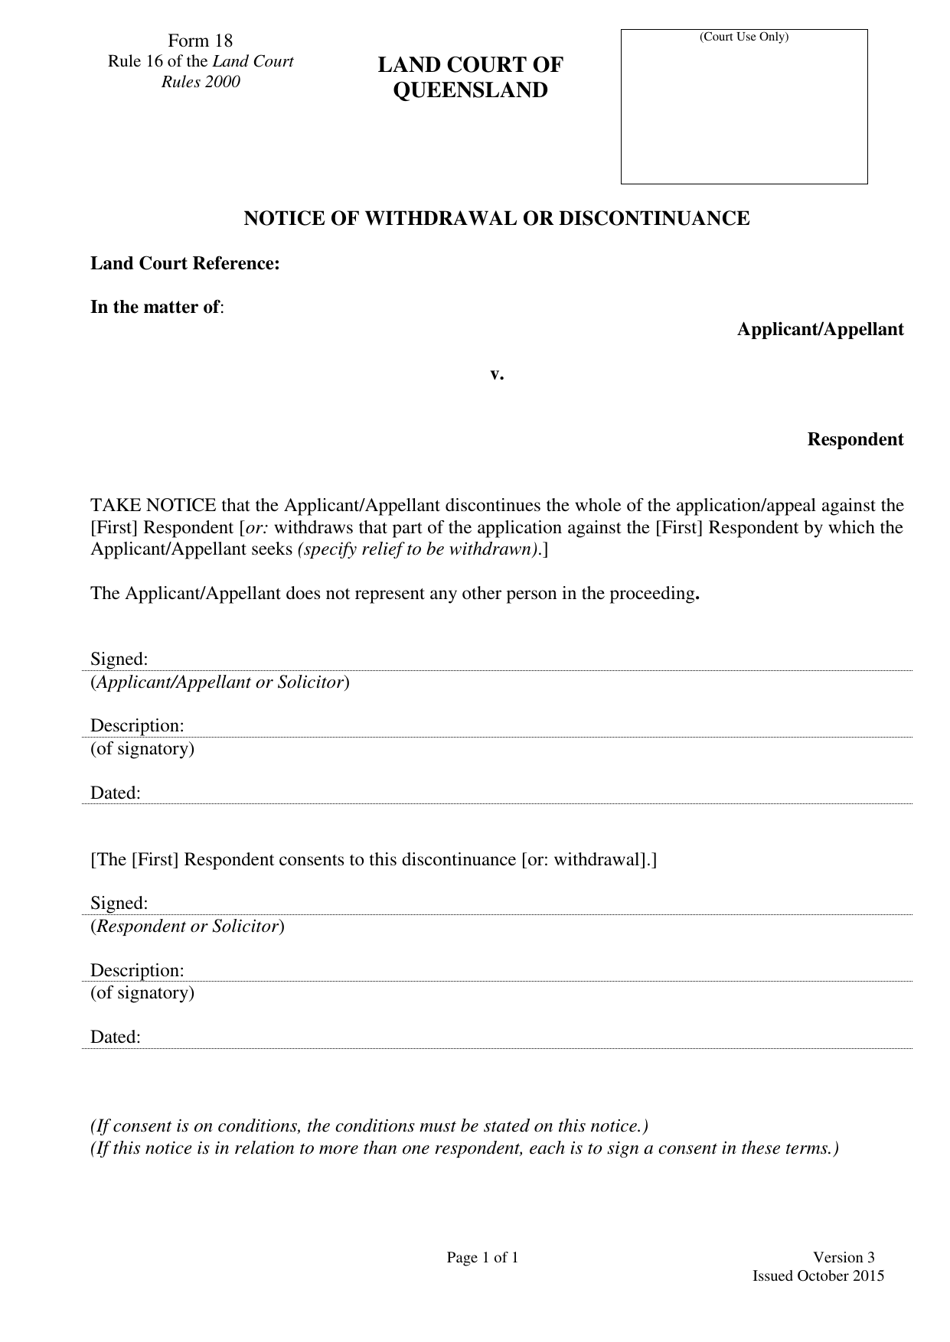 Form 18 Notice of Withdrawal or Discontinuance - Queensland, Australia, Page 1